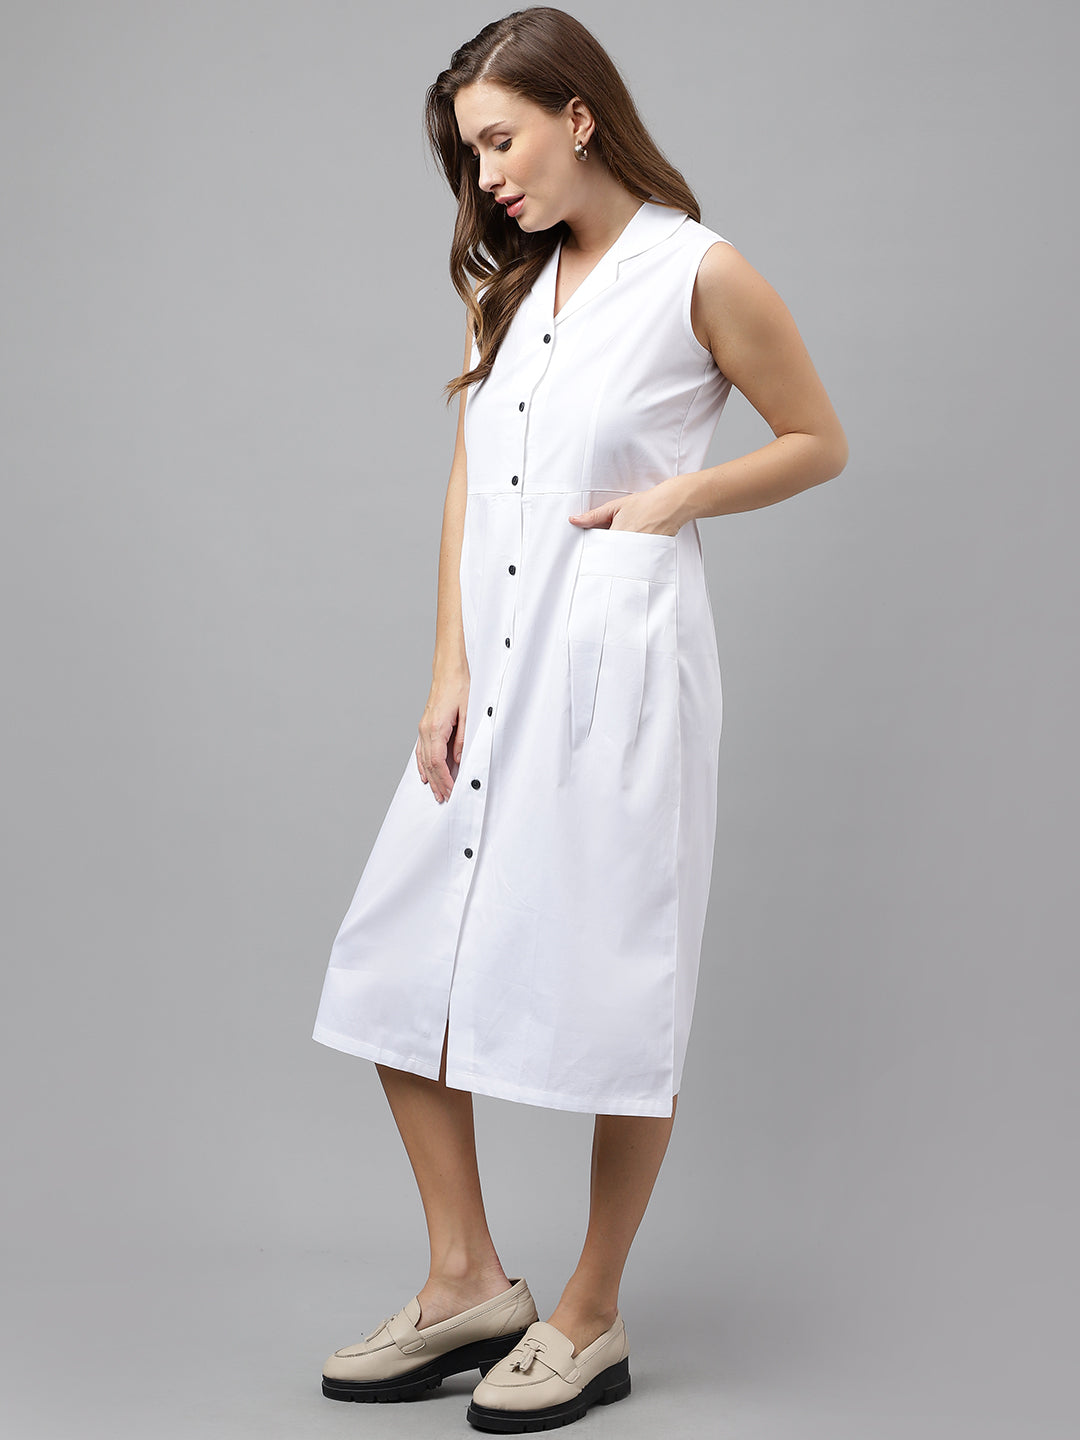 Buy White Dresses for Women by GAS Online | Ajio.com